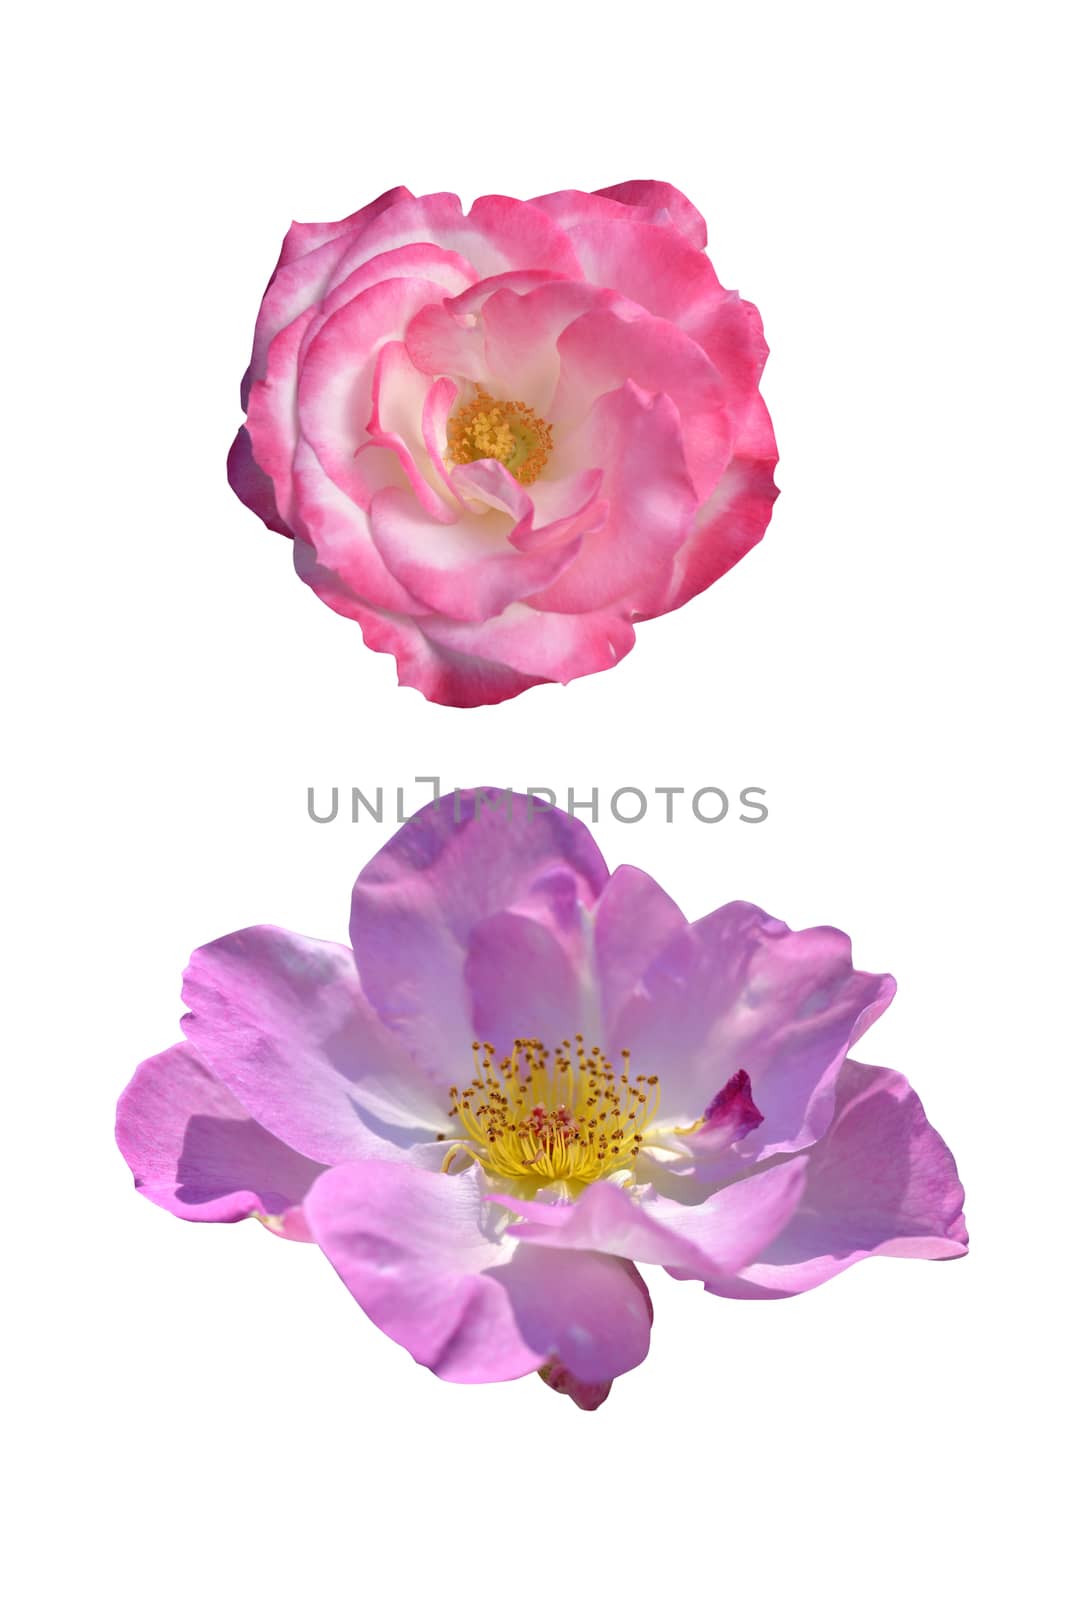 Clos-up of two roses isolated on white background